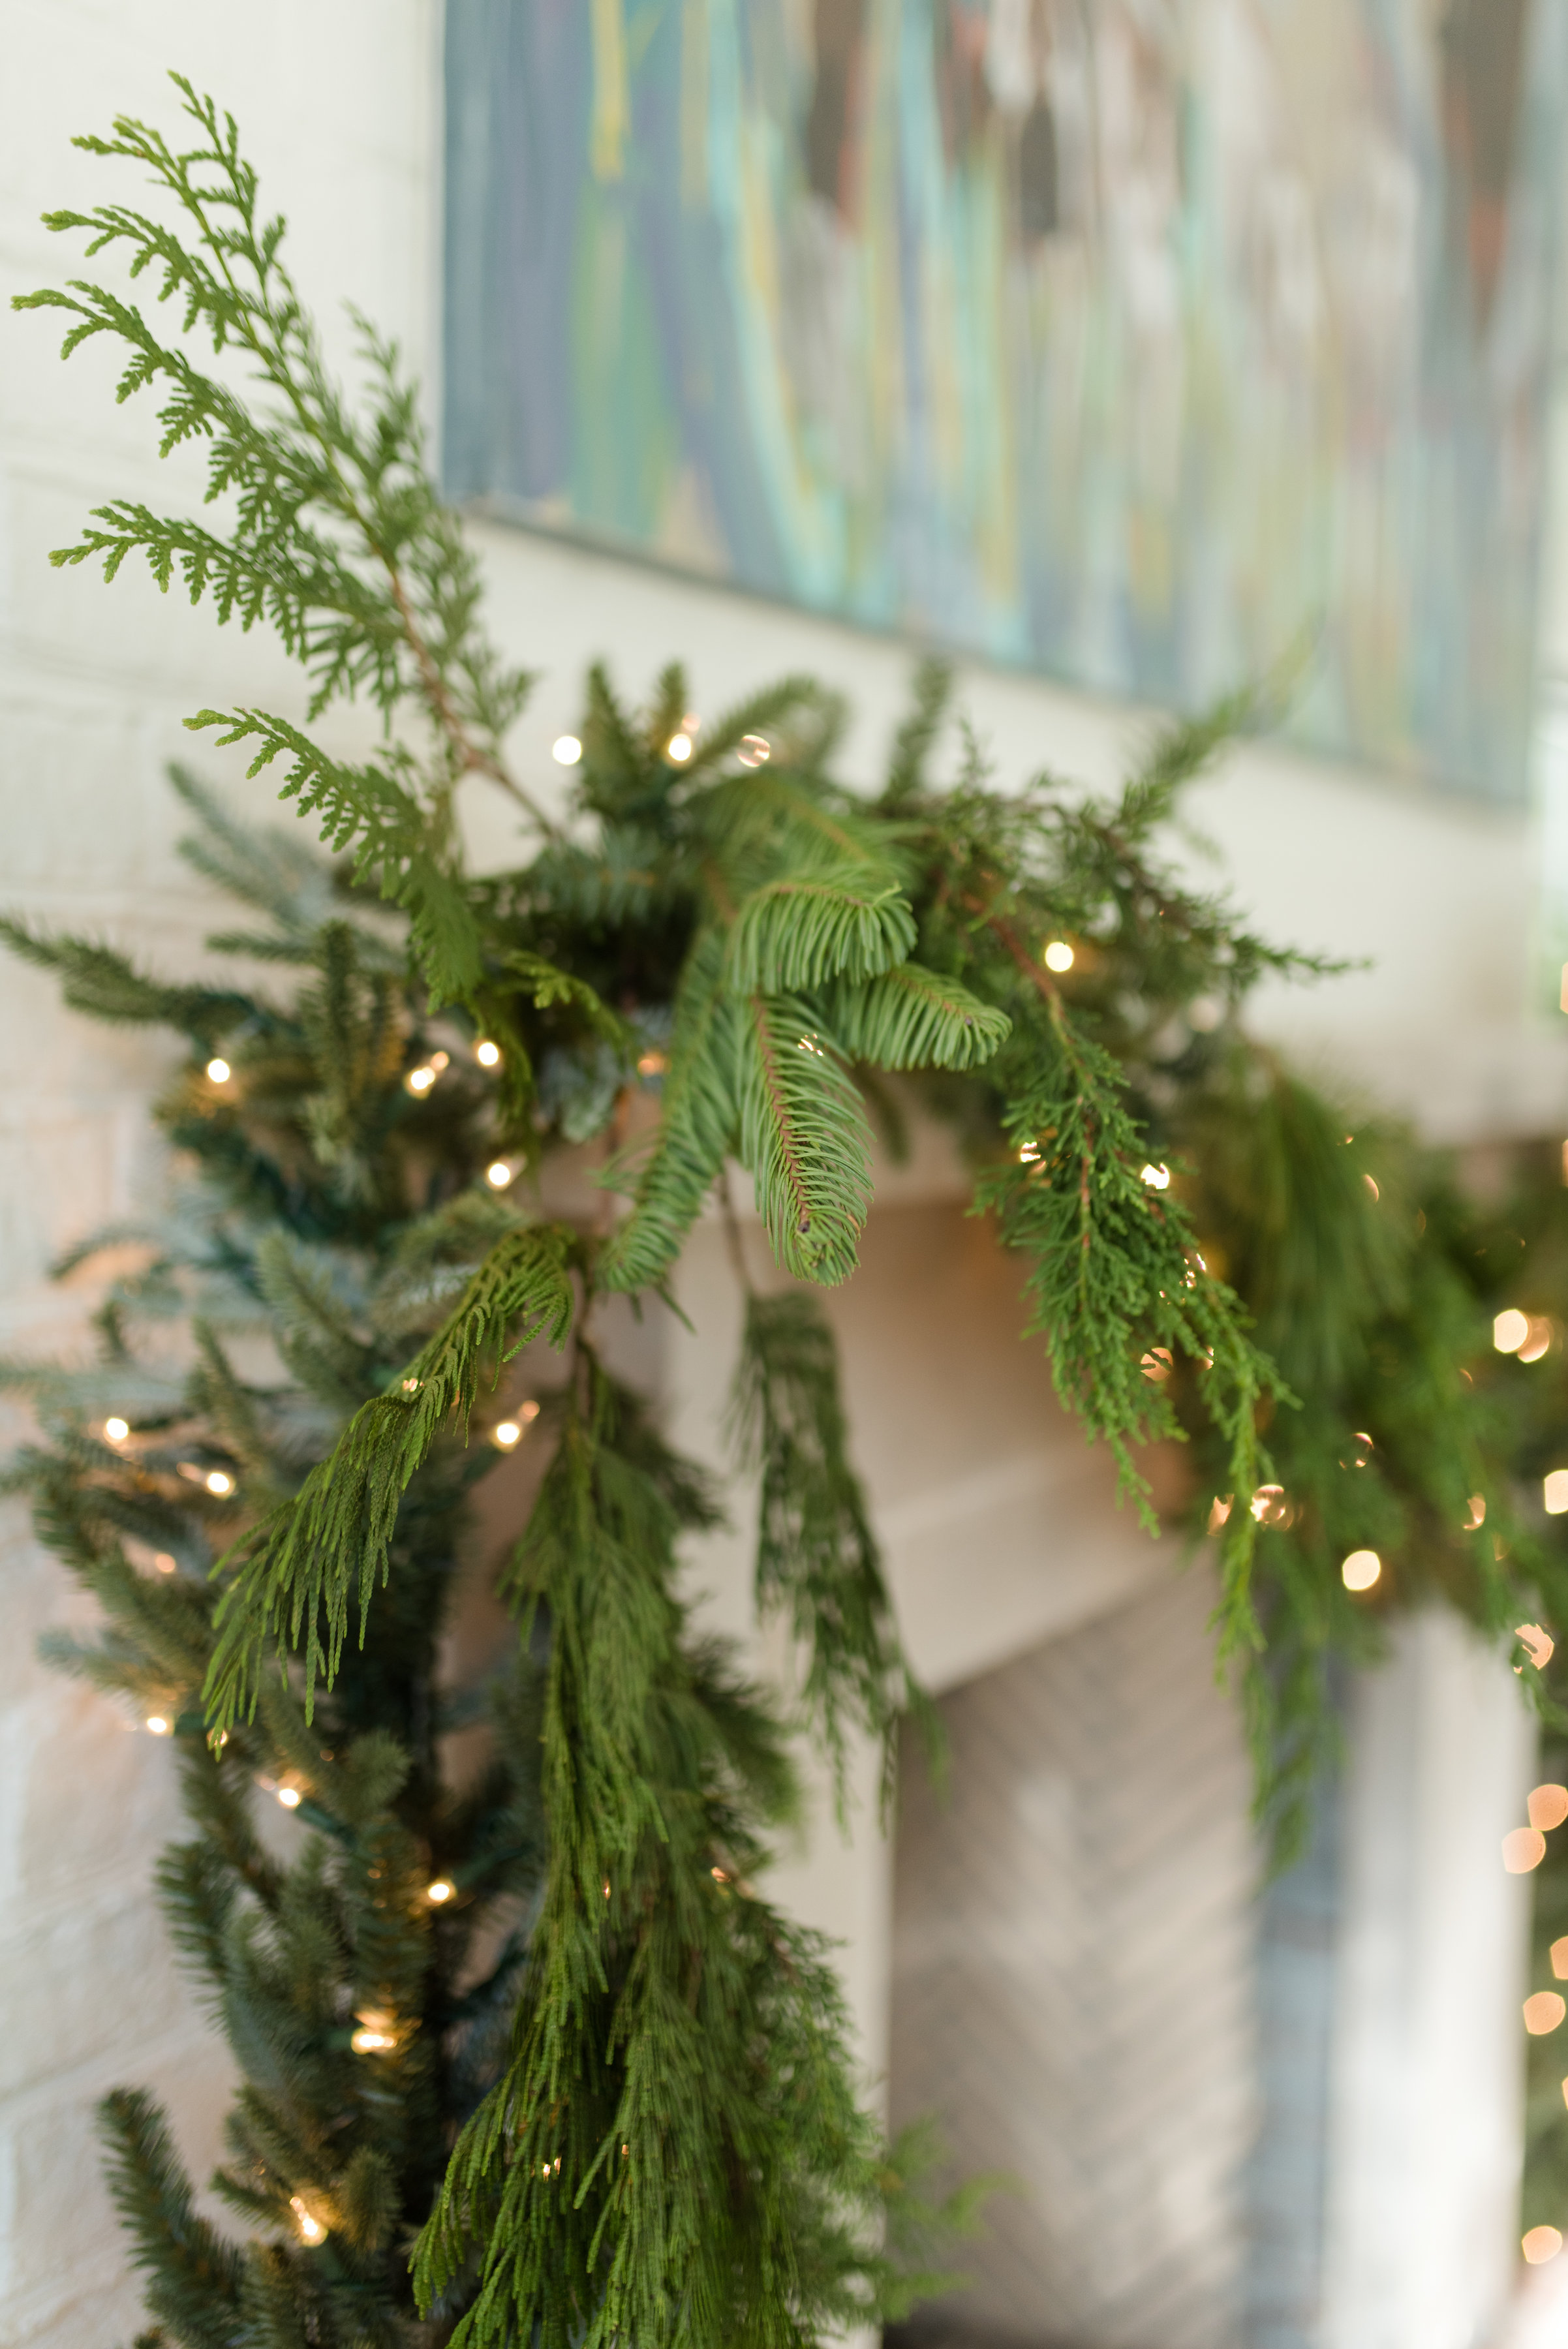 decorating your mantel for christmas on a budget